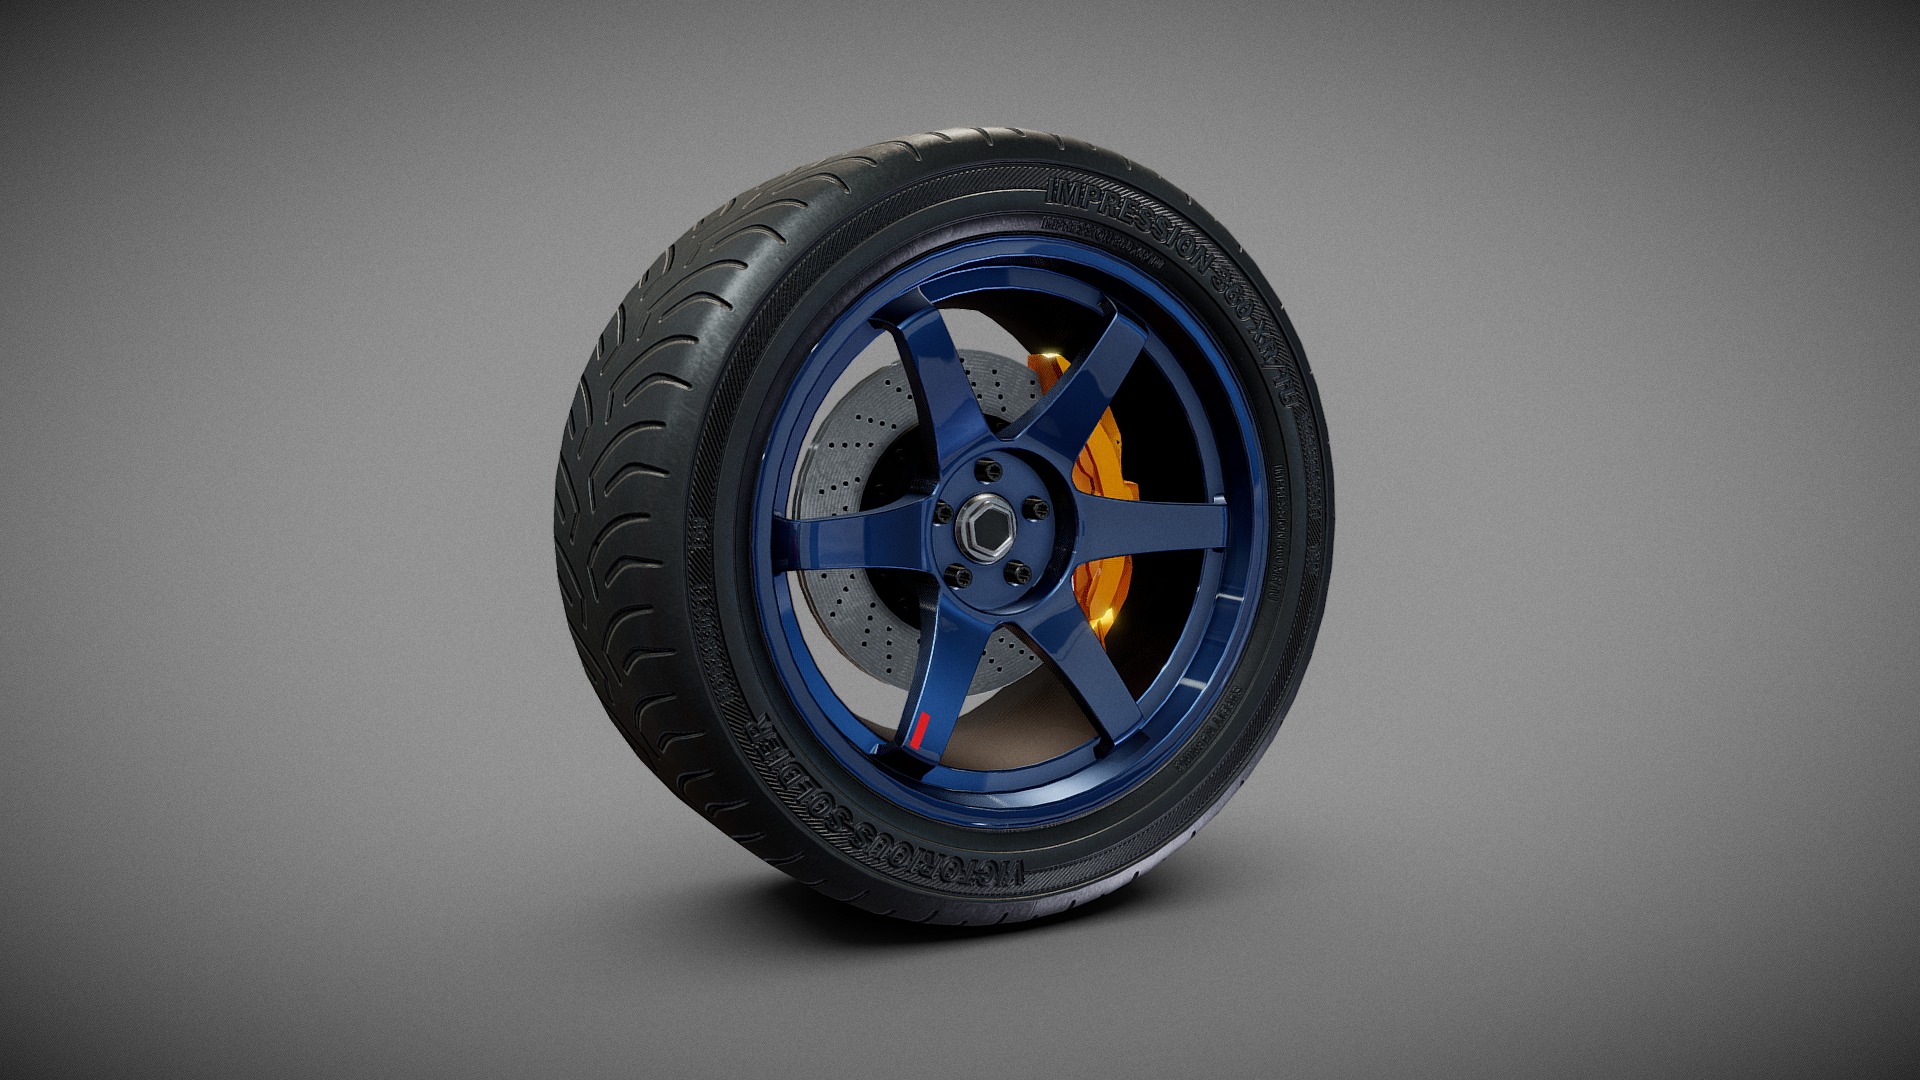 3D model Tune Racing Tire and Rim 3 - This is a 3D model of the Tune Racing Tire and Rim 3. The 3D model is about a blue and black tire.